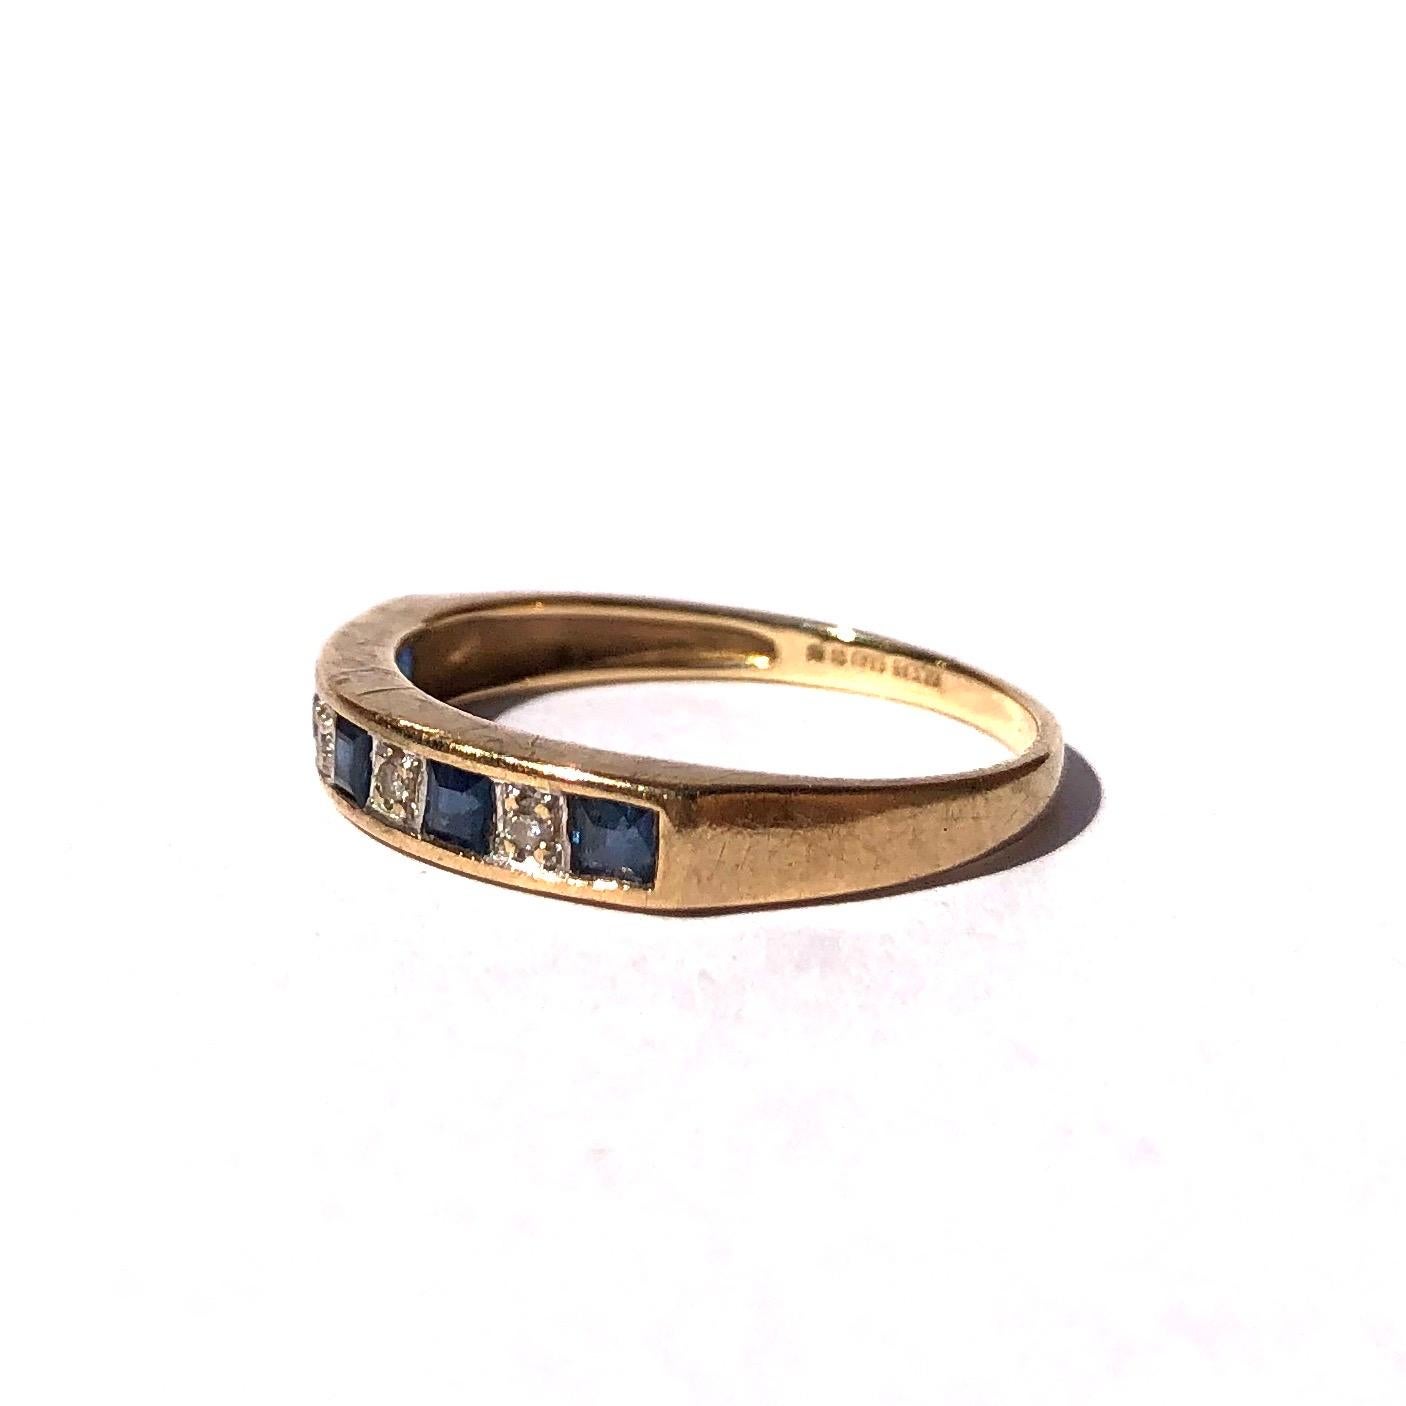 Set within this 18ct gold band there are five deep blue sapphires and four sparking diamonds. The sapphires are square cut and measure 10pts each. 

Ring Size: N or 6 3/4
Band Width: 3mm

Weight: 1.7g 